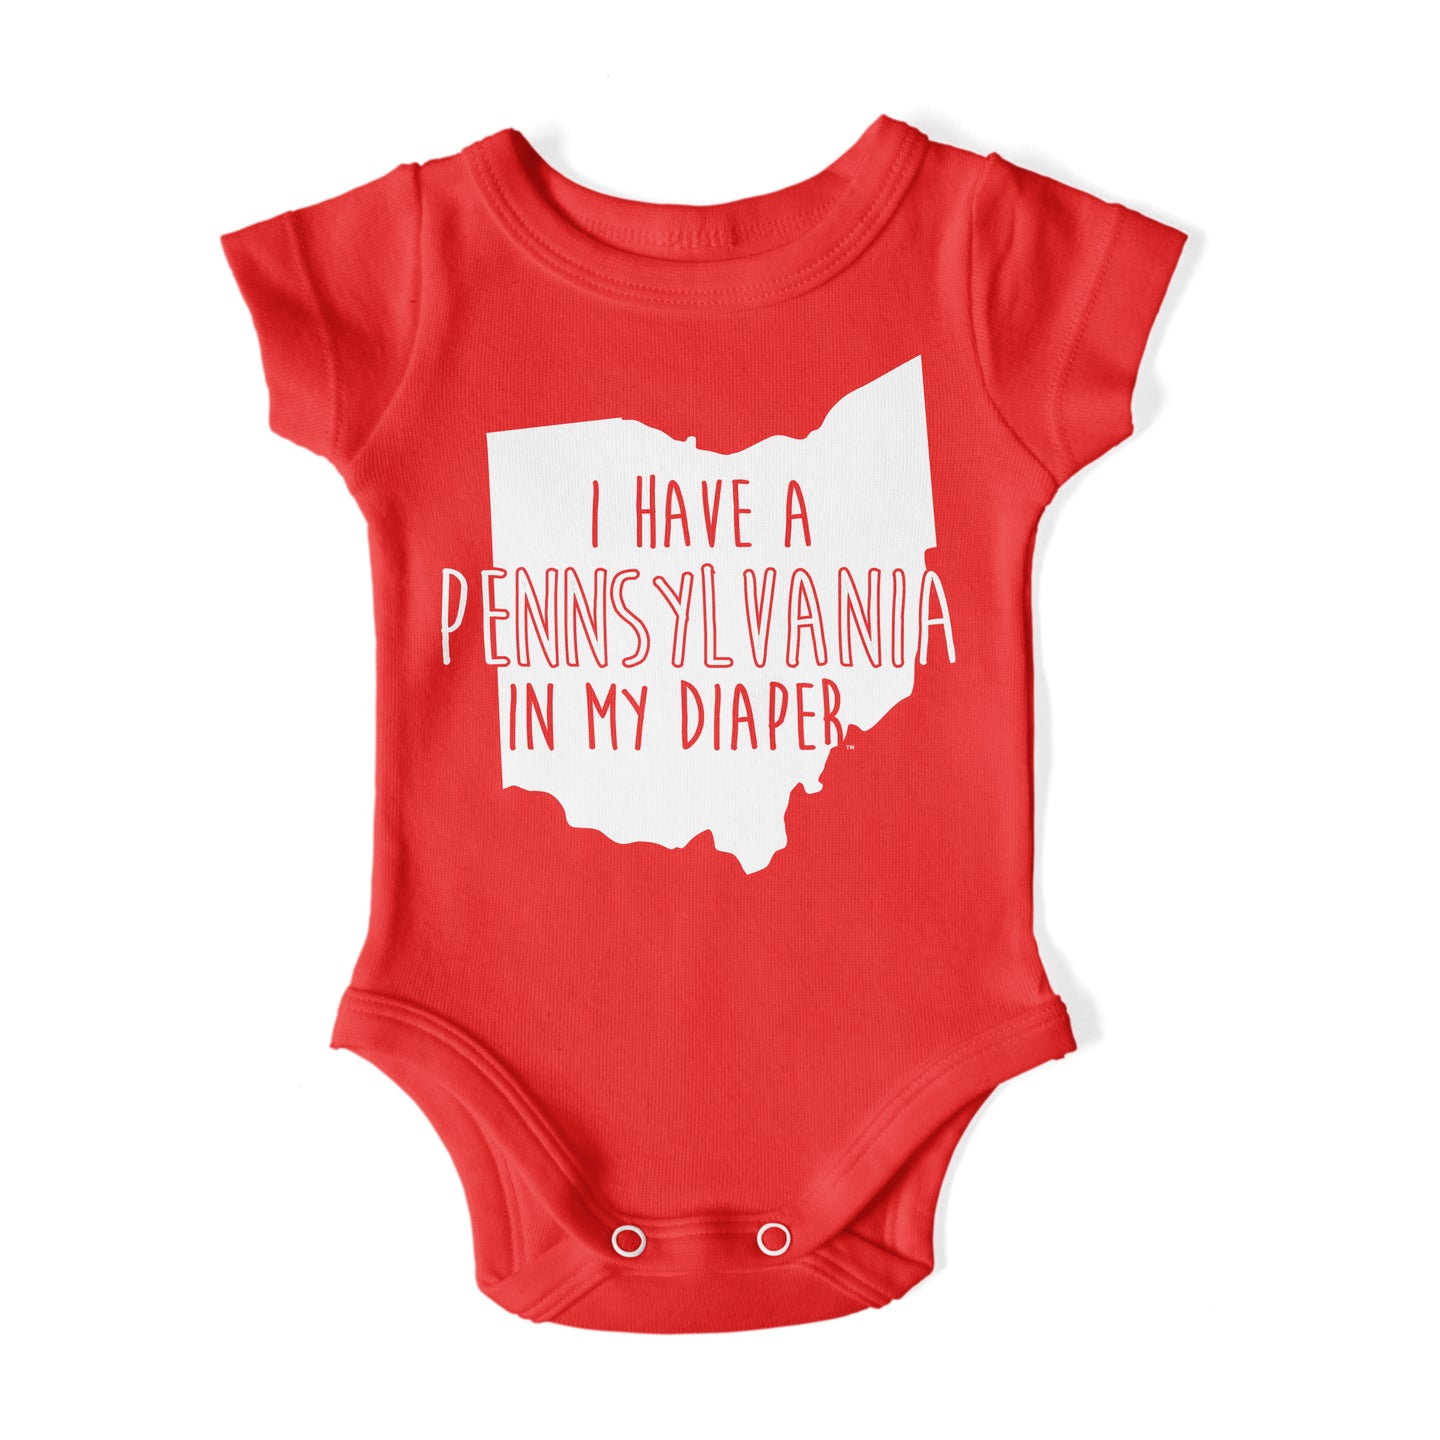 I HAVE A PENNSYLVANIA IN MY DIAPER Baby One Piece